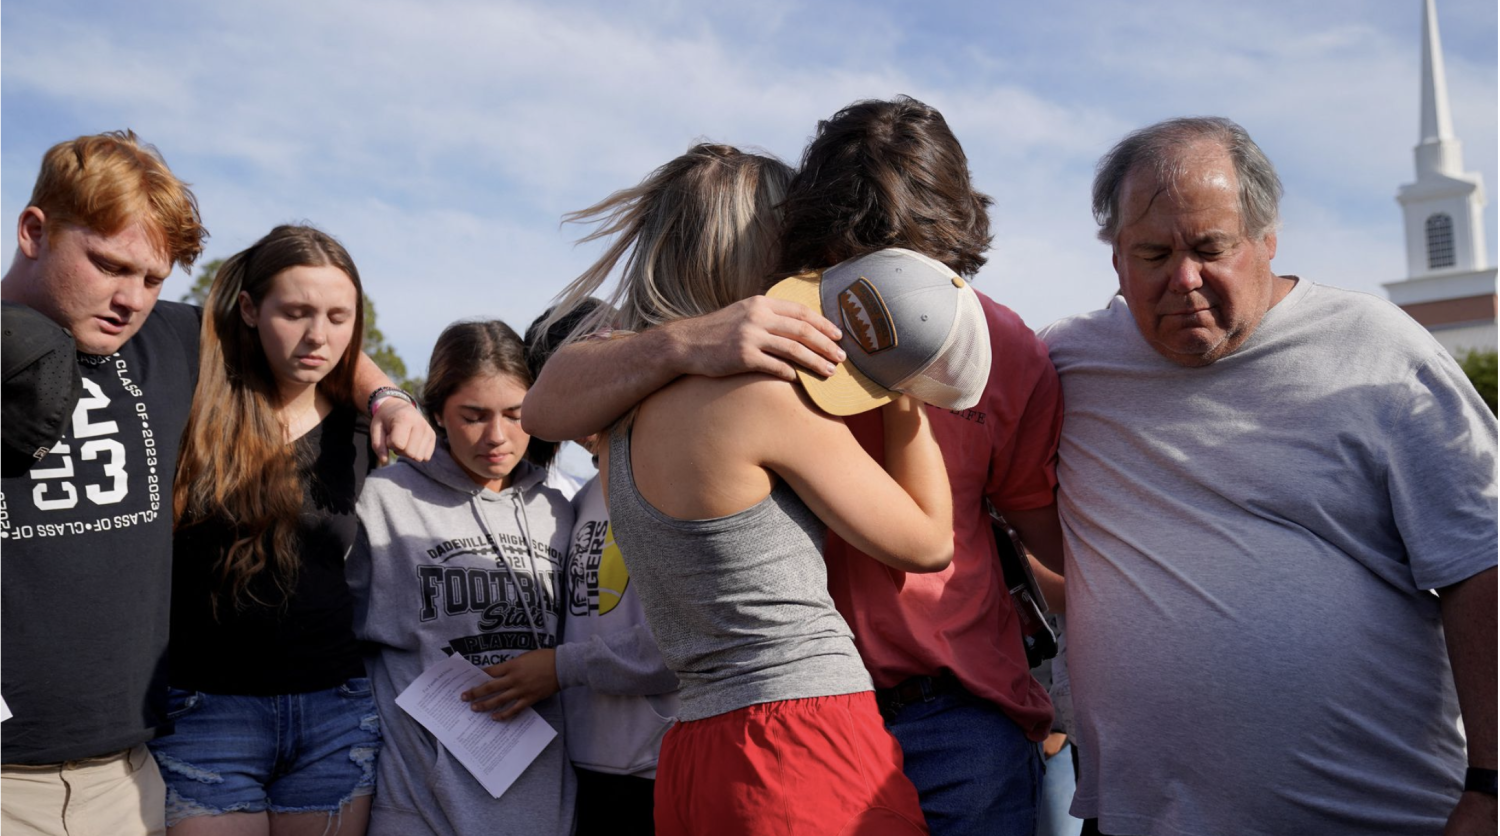 [1/5] Community members embrace each other during a vigil the day after a shooting during a teenager's birthday party at Mahogany Masterpiece Dance Studio in Dadeville, Alabama, U.S., April 16, 2023. REUTERS/Cheney Orr